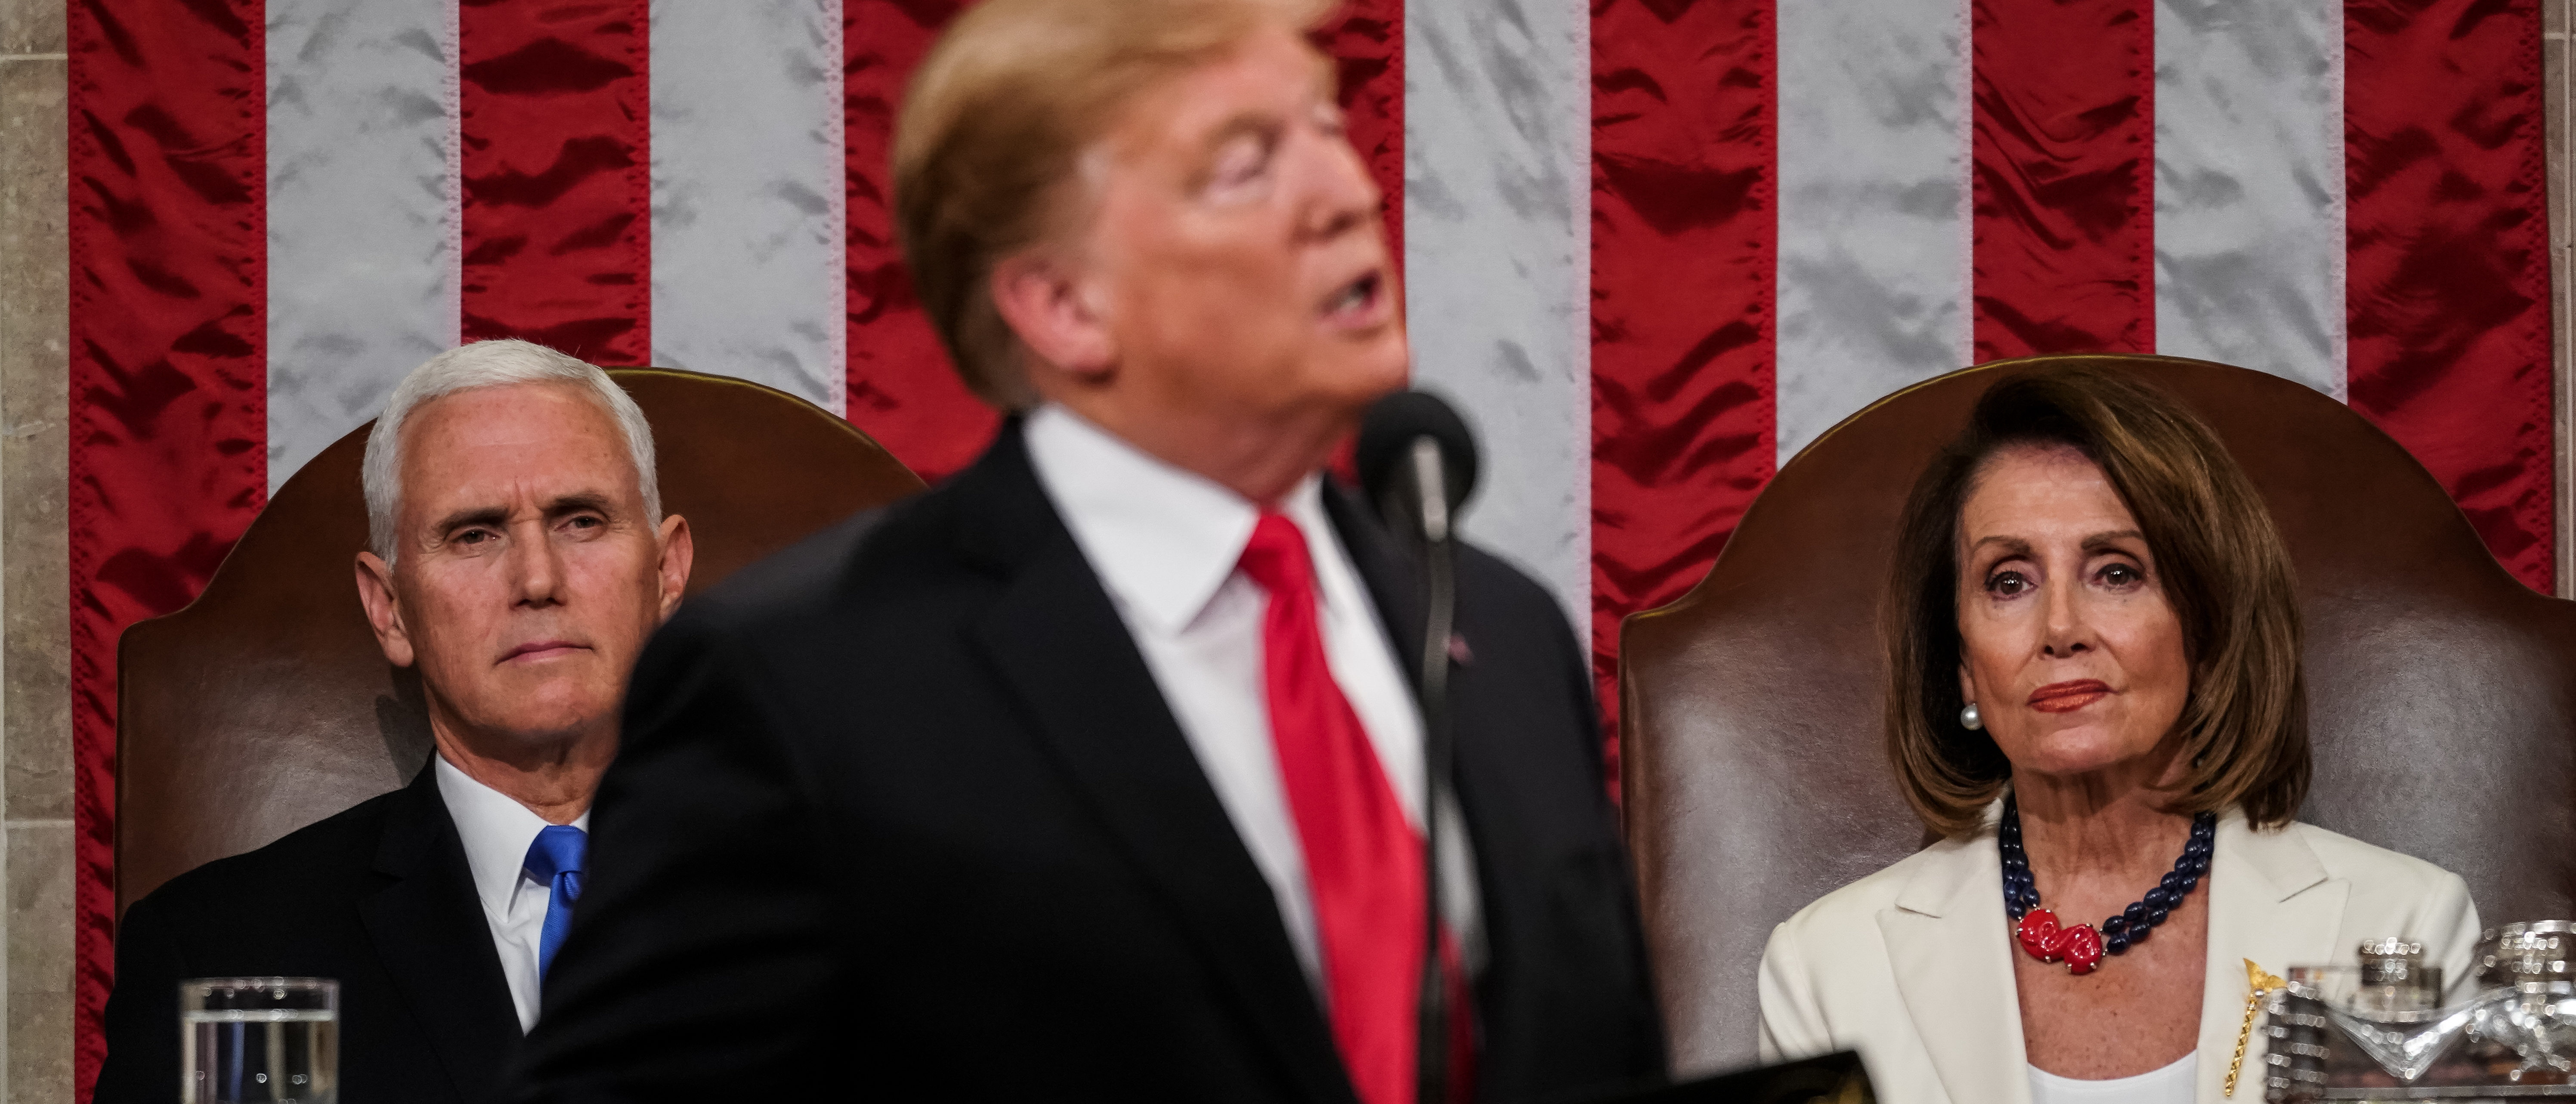 WASHINGTON, DC - FEBRUARY 5: Speaker Nancy Pelosi and Vice President Mike Pence look on as U.S. President Donald Trump delivers the State of the Union address in the chamber of the U.S. House of Representatives at the U.S. Capitol Building on February 5, 2019 in Washington, DC. (Photo by Doug Mills-Pool/Getty Images)